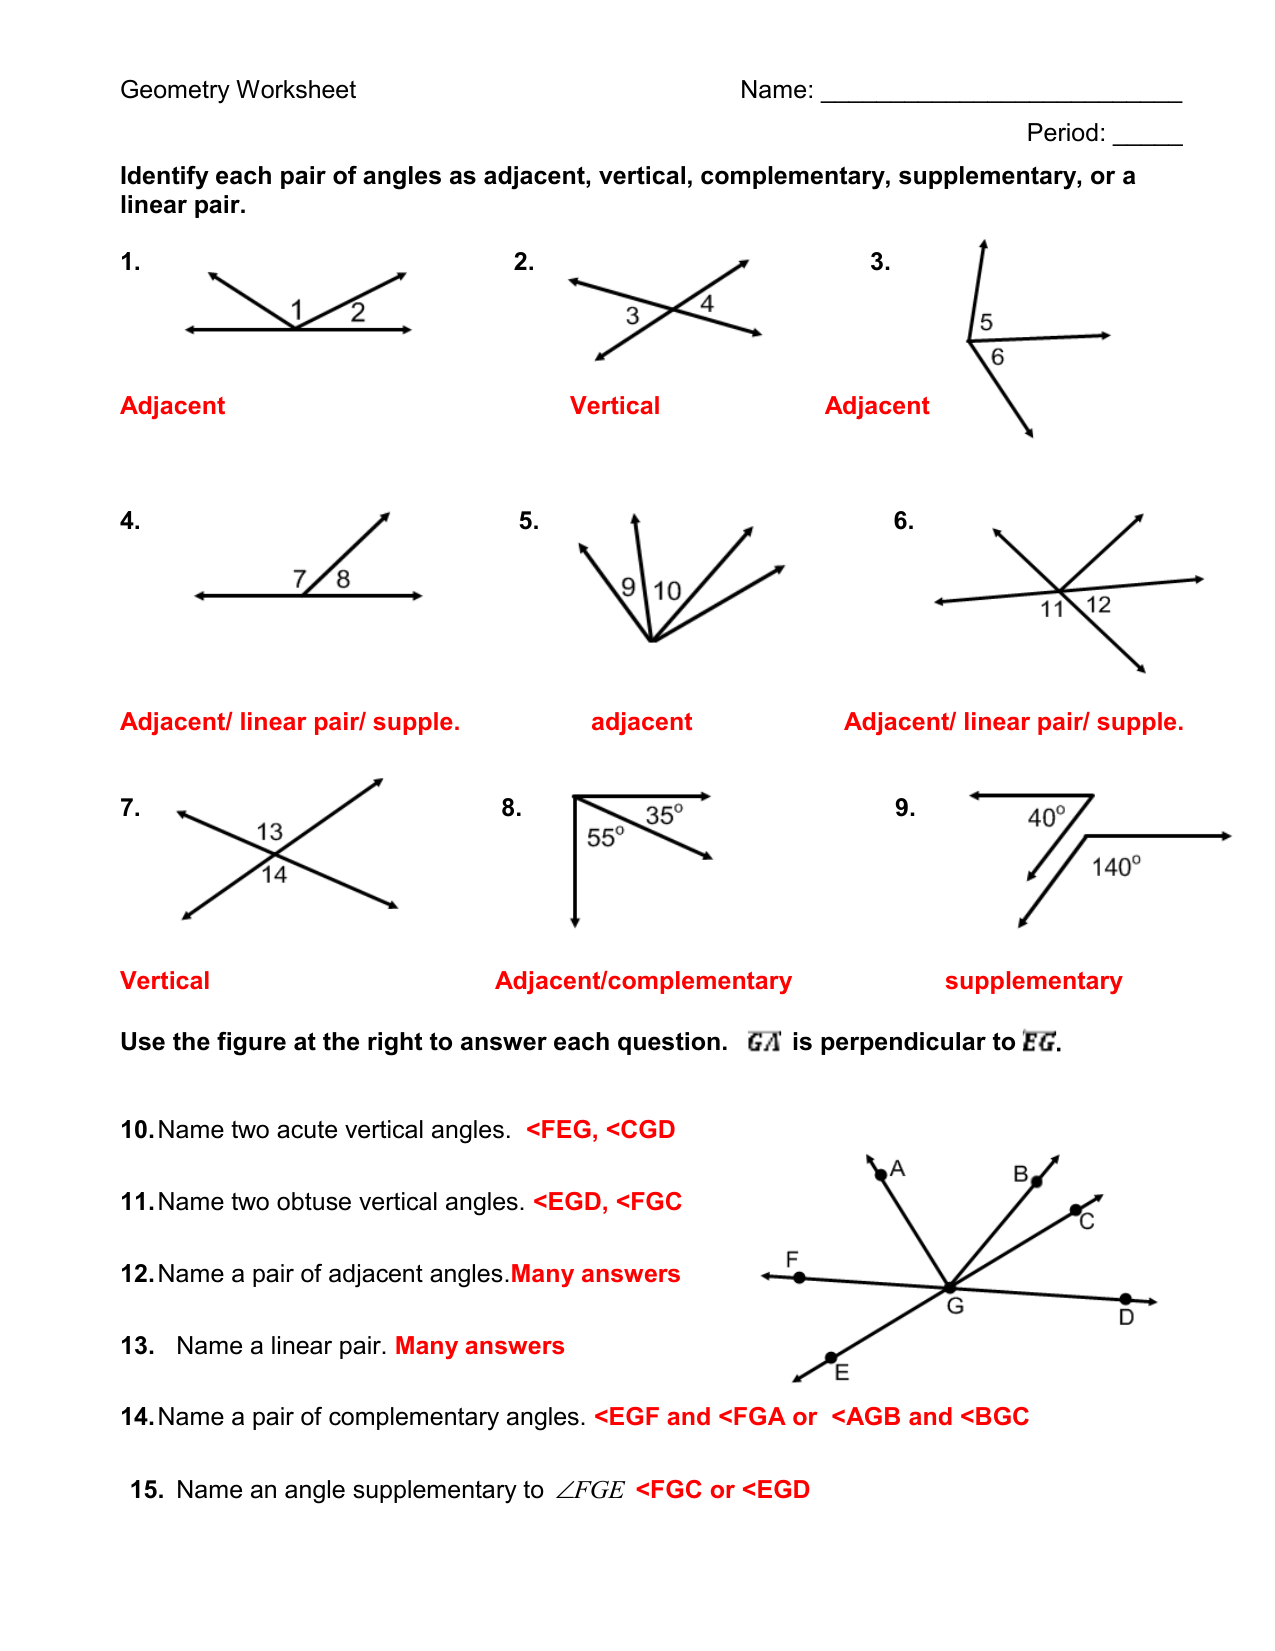 angles worksheet answers